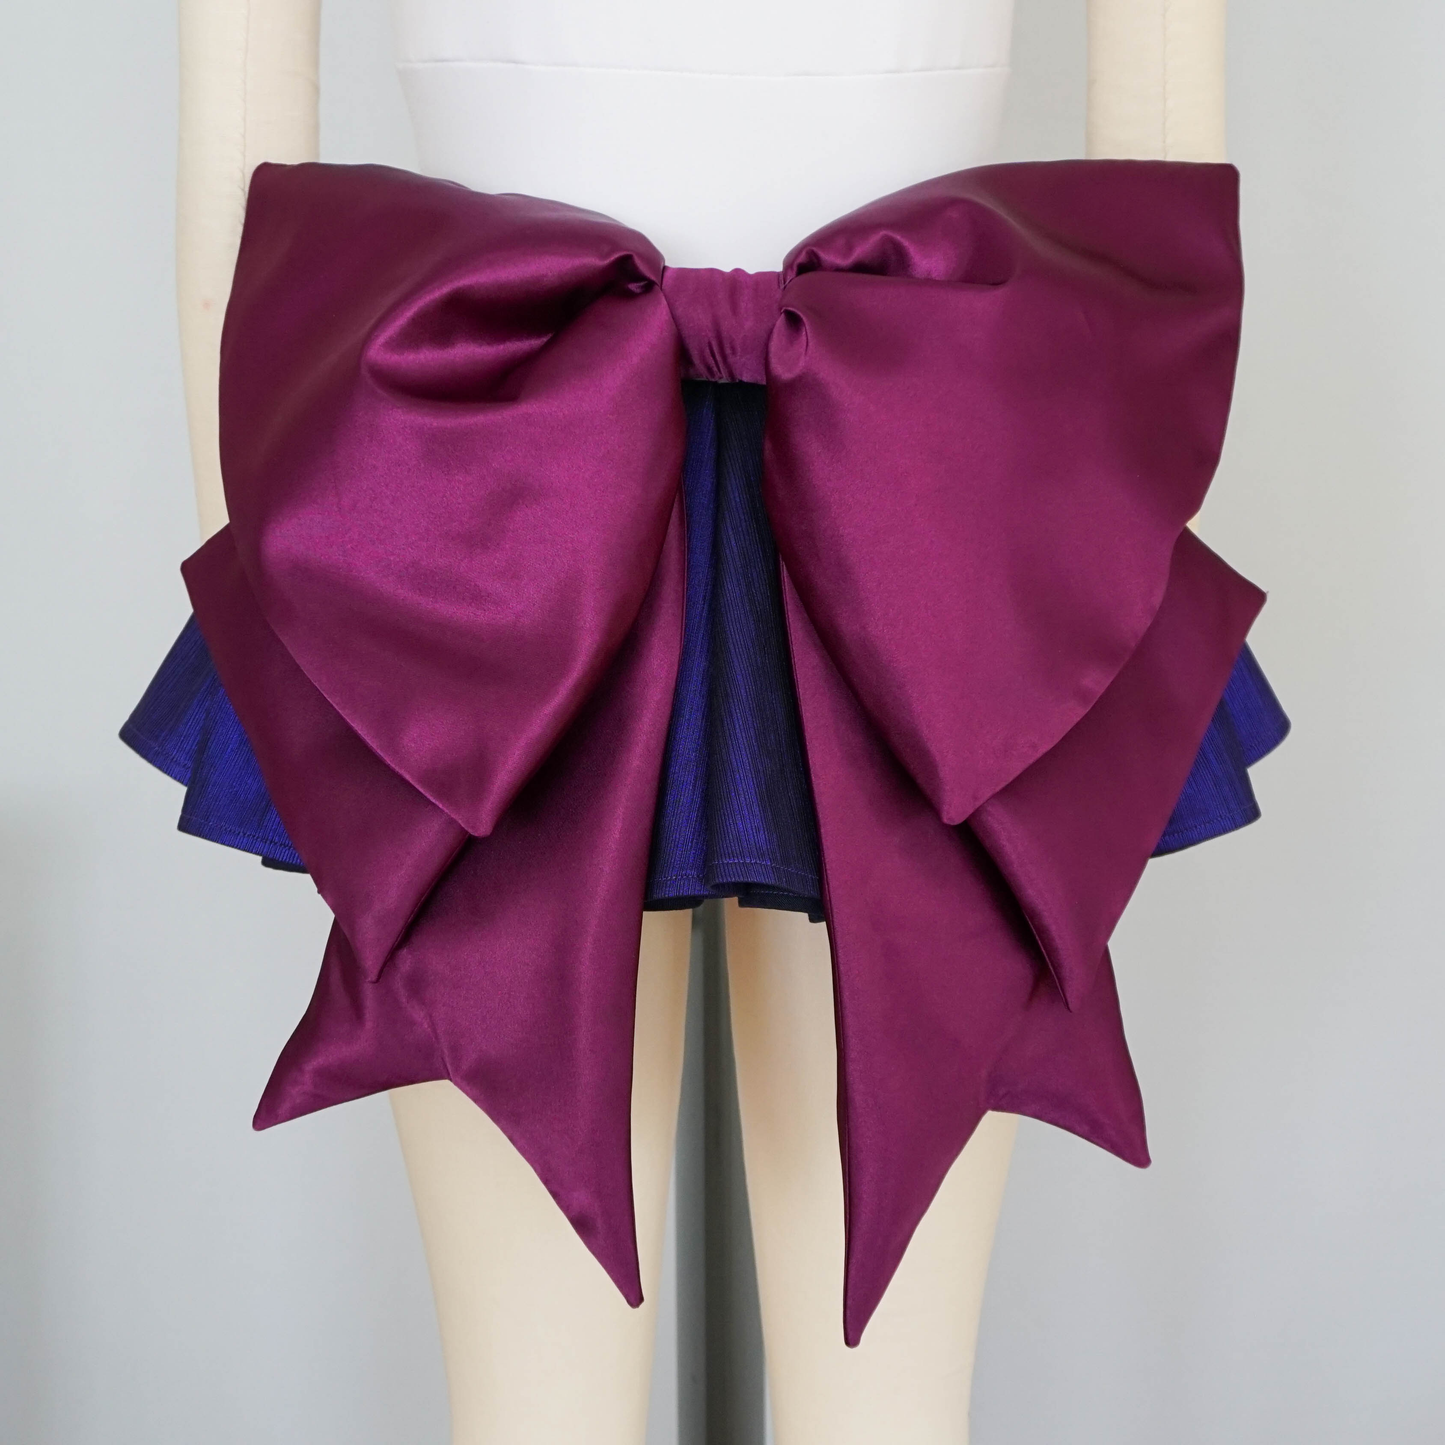 Basic Cosplay Bow Bundle Sewing Pattern/Downloadable PDF File and Tutorial Book